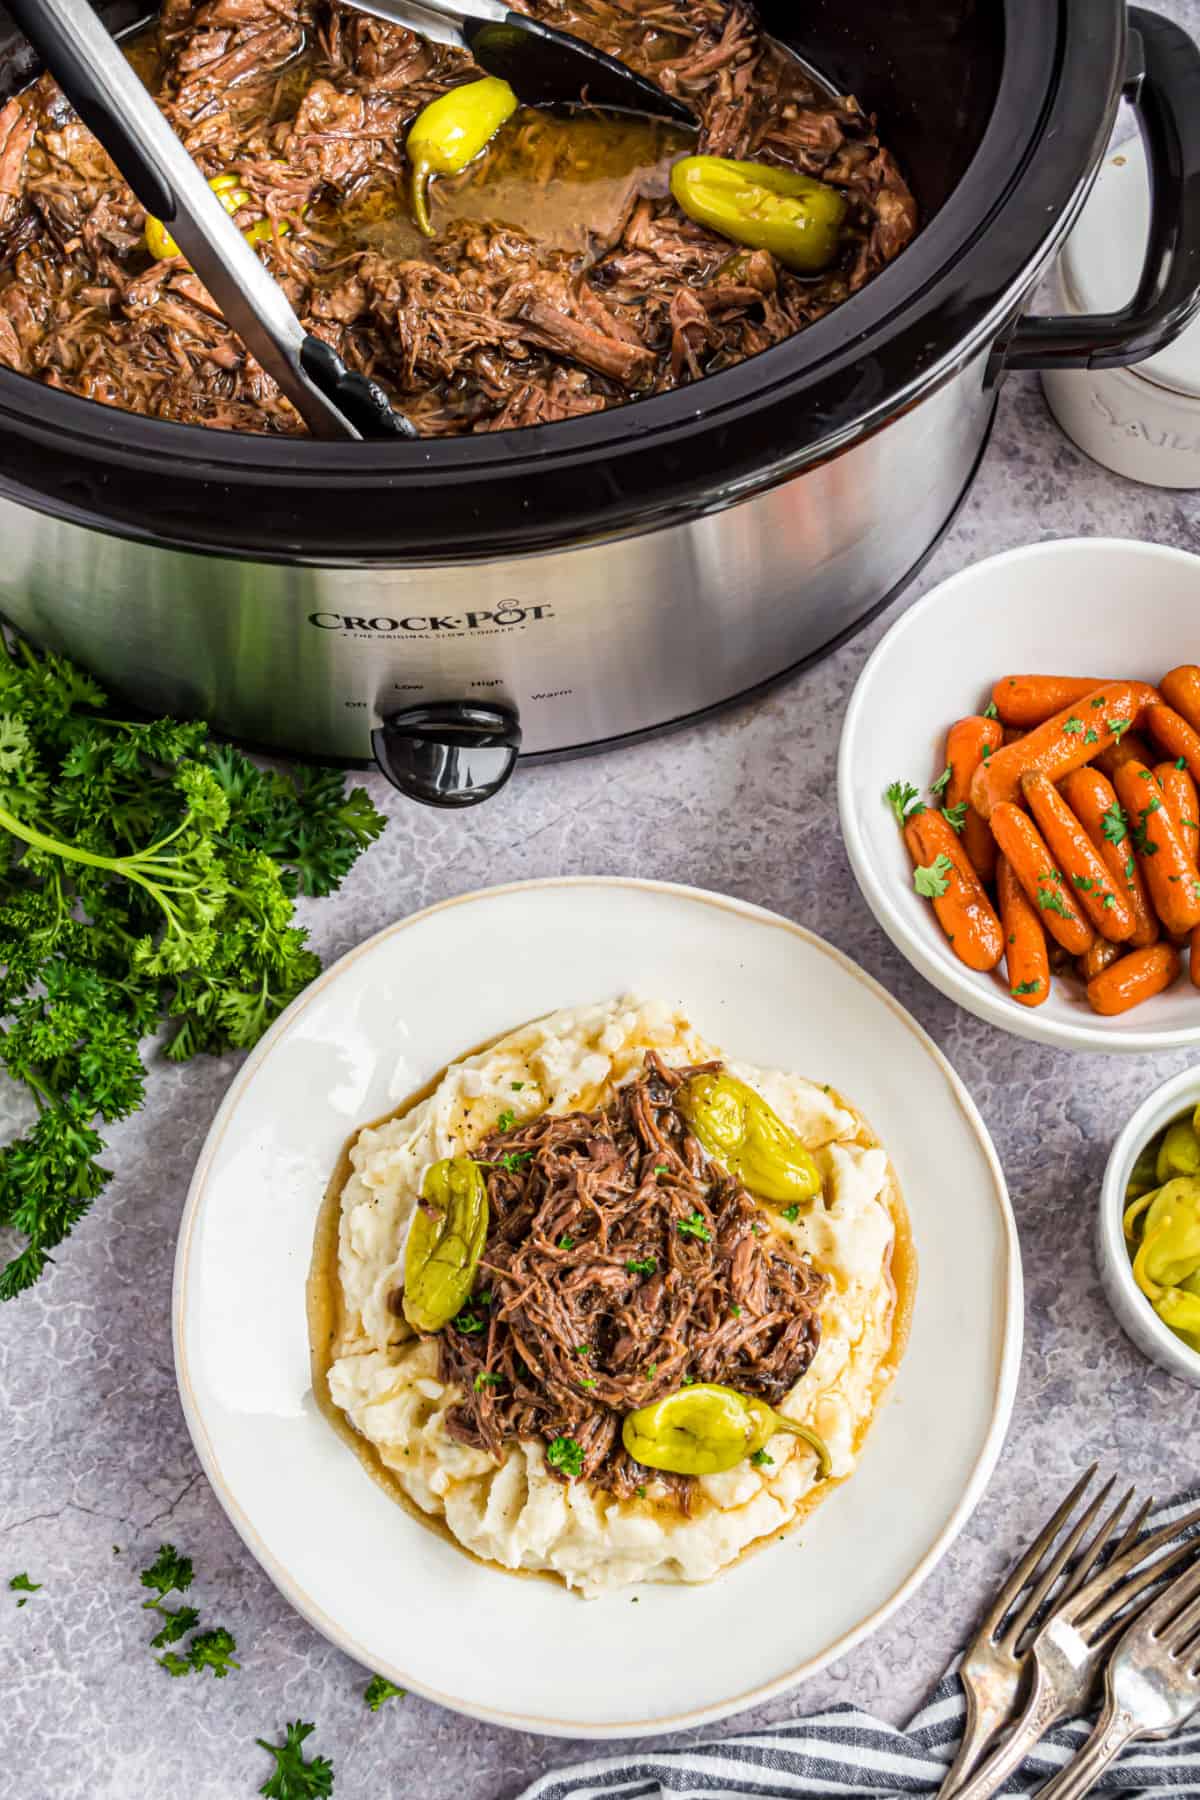 A Naturally low-carb dinner idea made in the slow cooker!